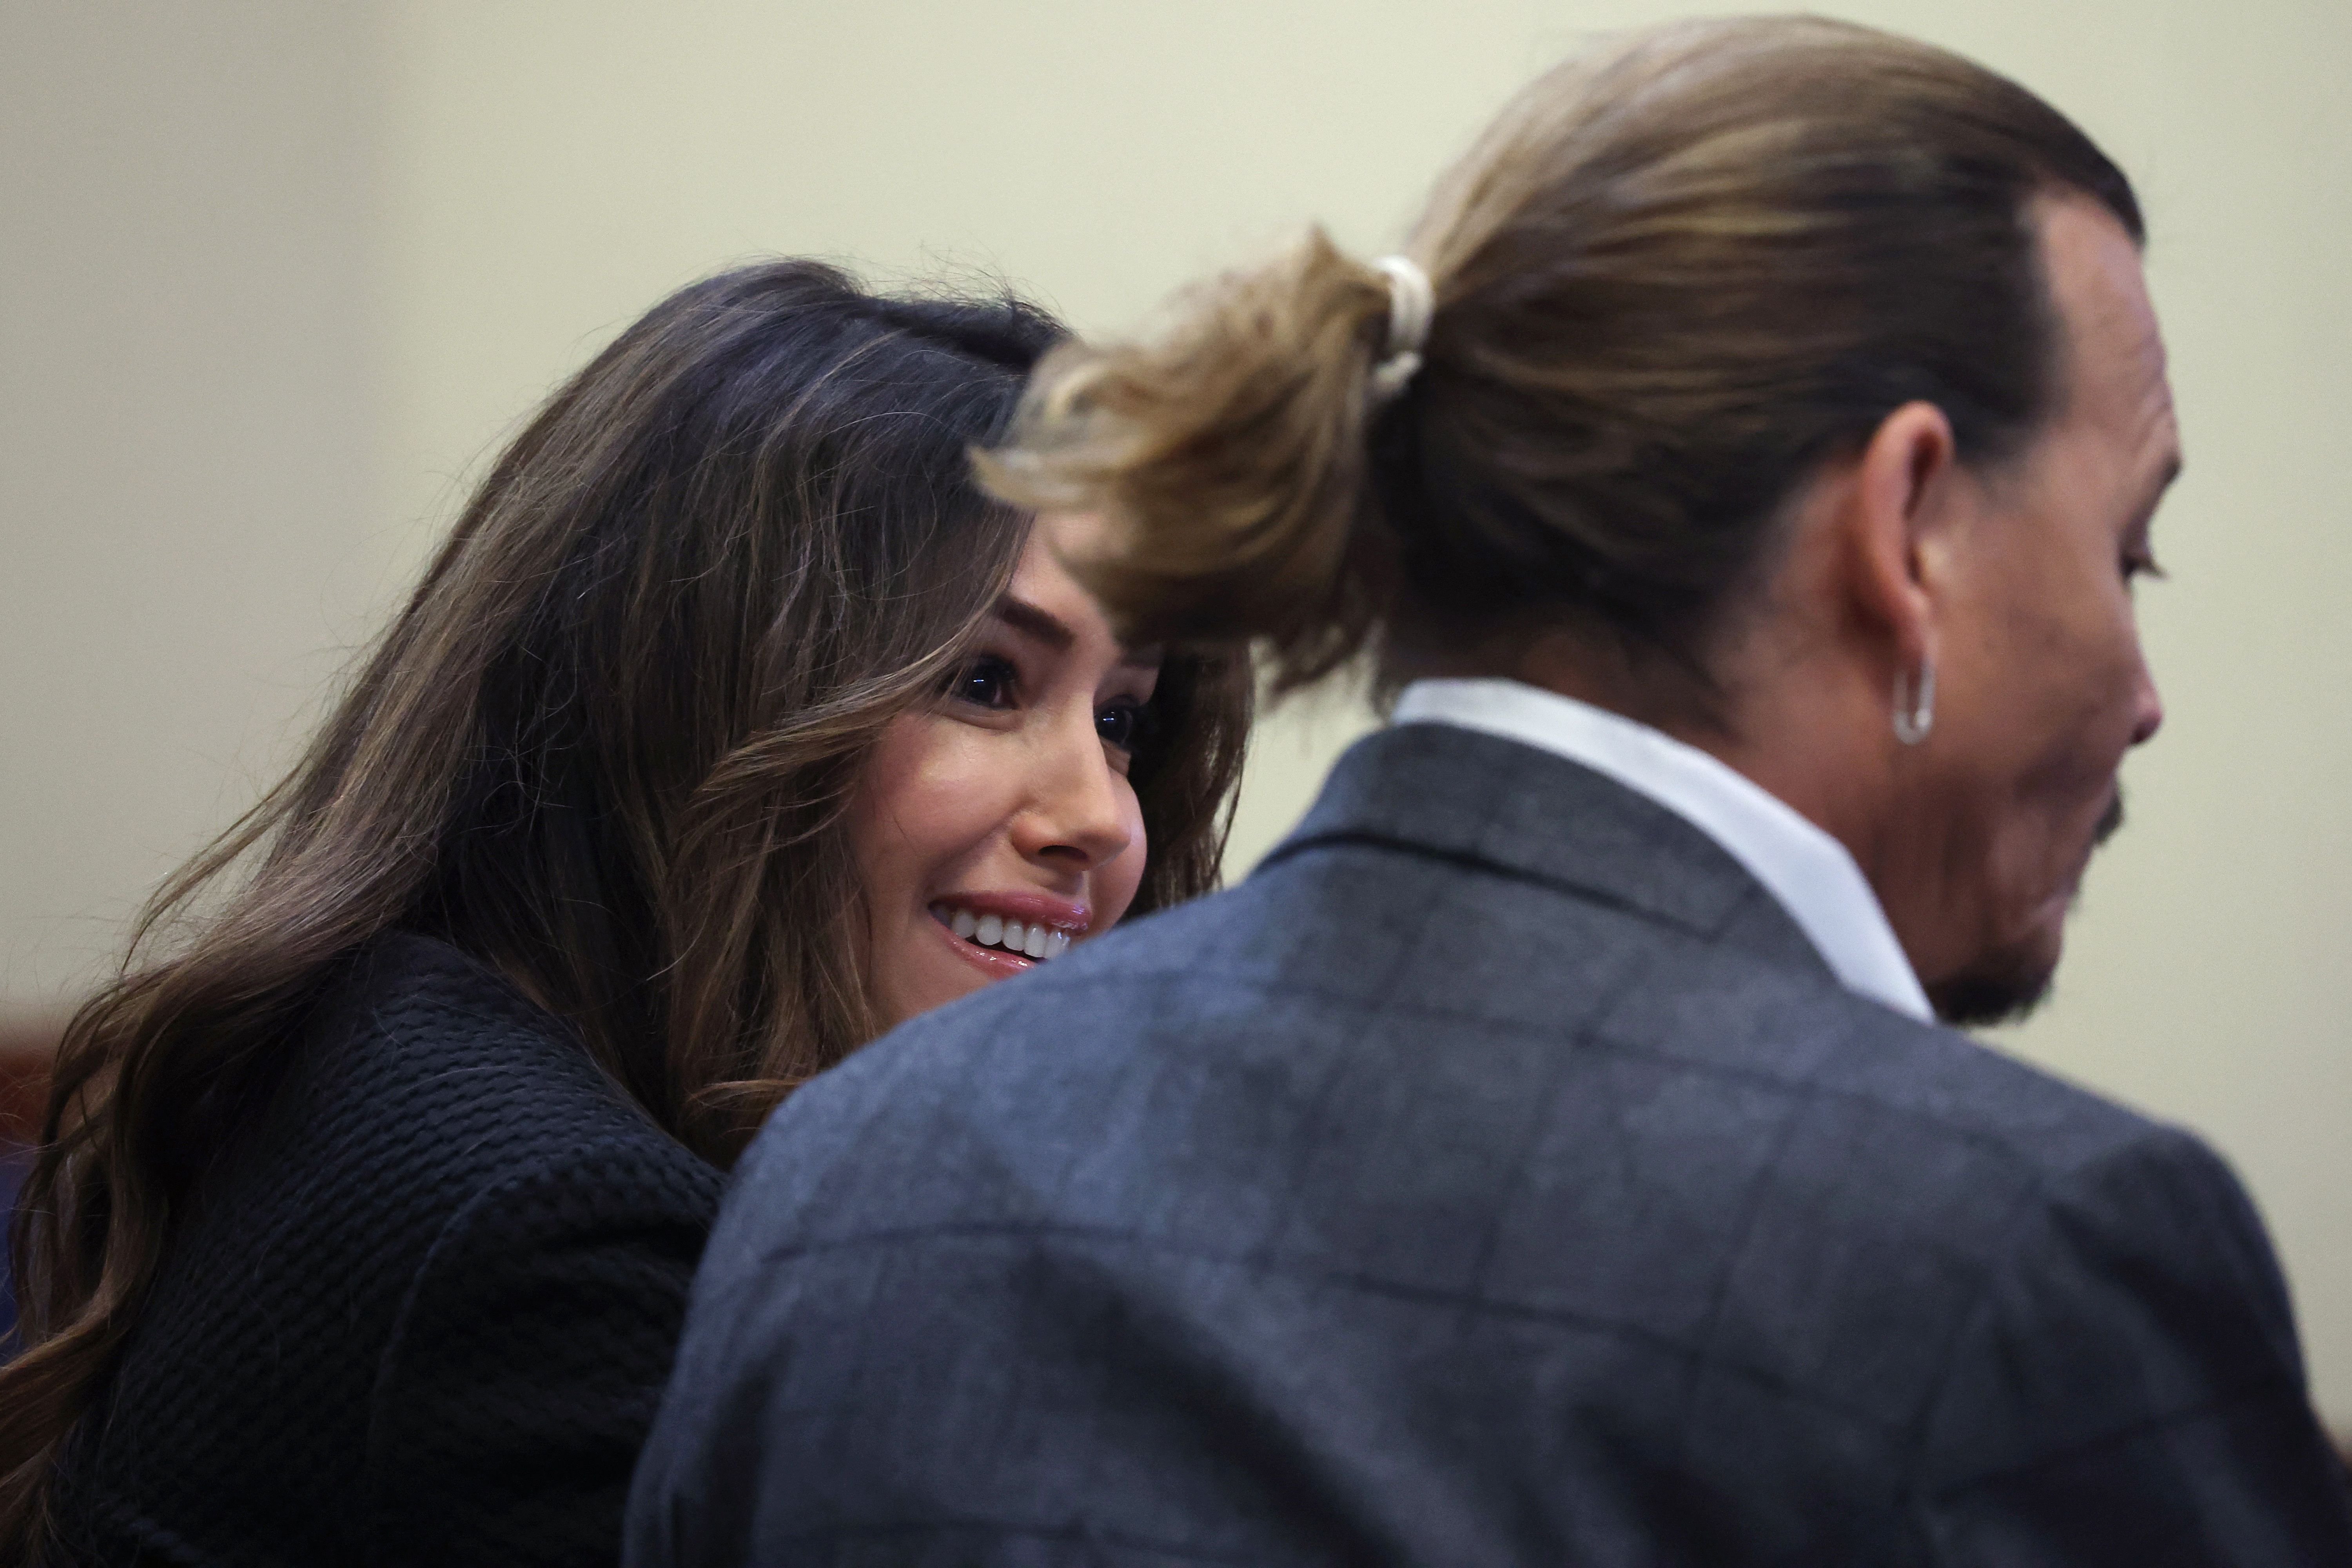 Johnny Depp and attorney Camille Vasquez during the Depp vs Heard defamation trial at the Fairfax County Circuit Court in Fairfax, Virginia, on April 28, 2022. | Source: Getty Images